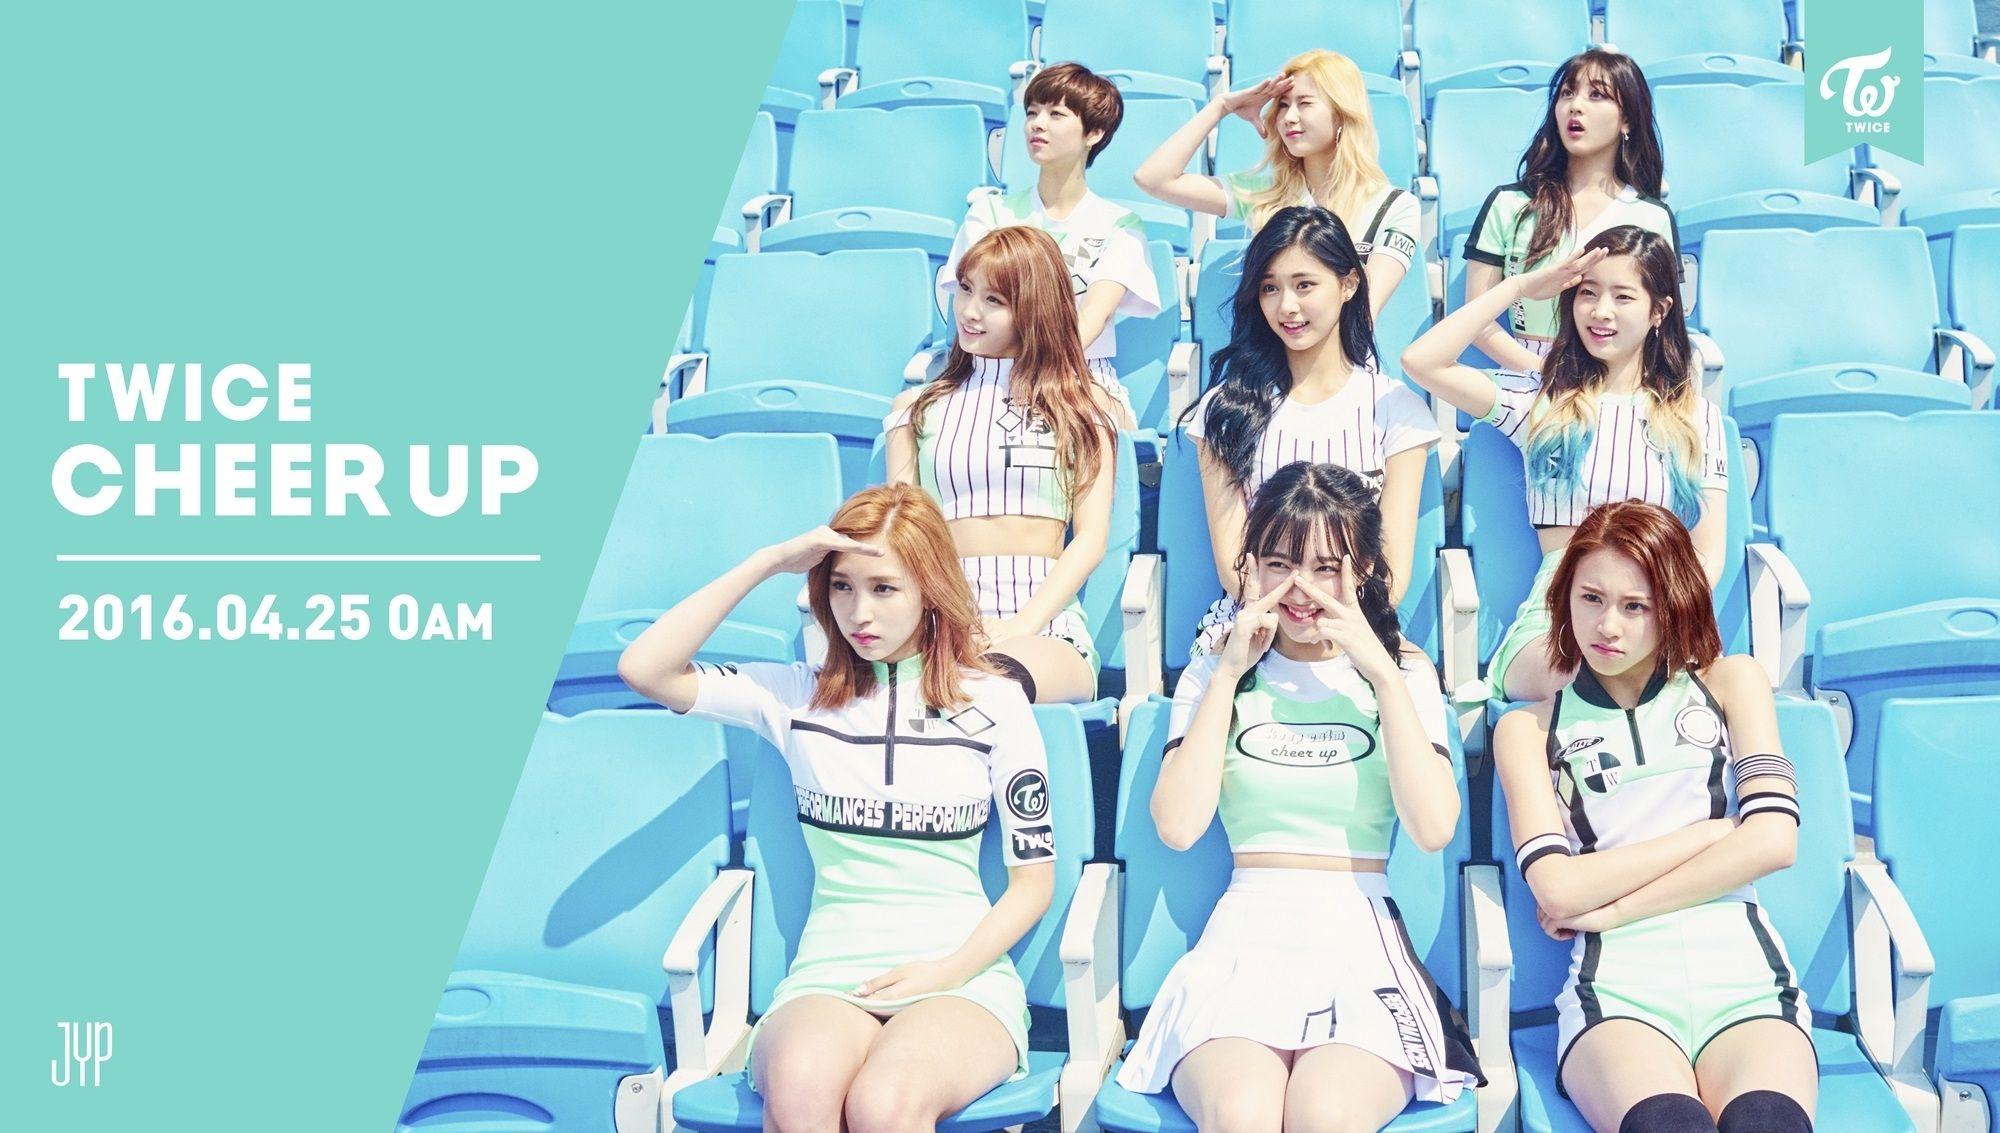 Most Popular Twice Cheer Up Wallpaper FULL HD 1080p For PC